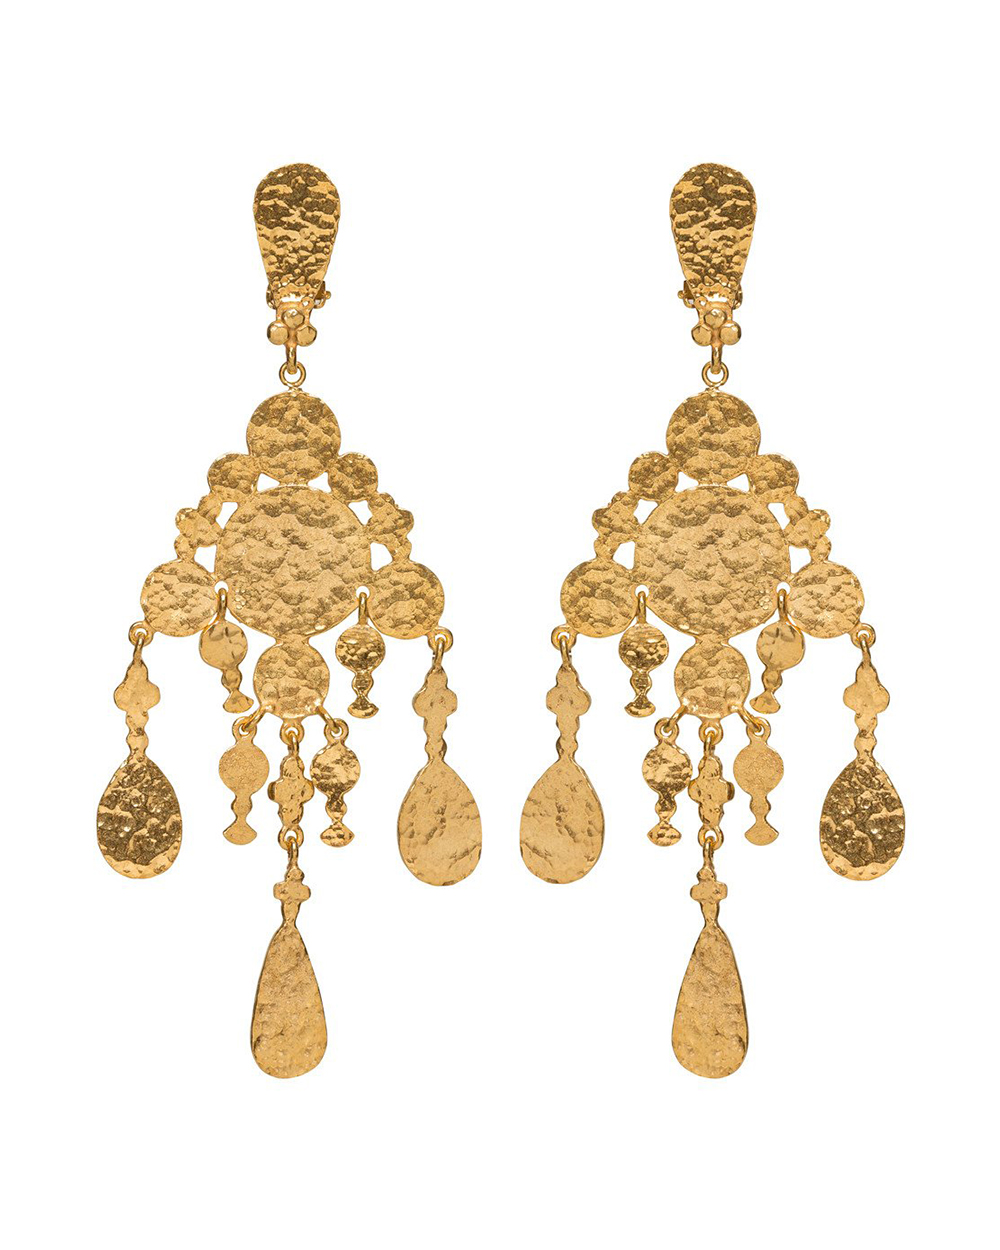 Christie Nicolaides earrings, $256